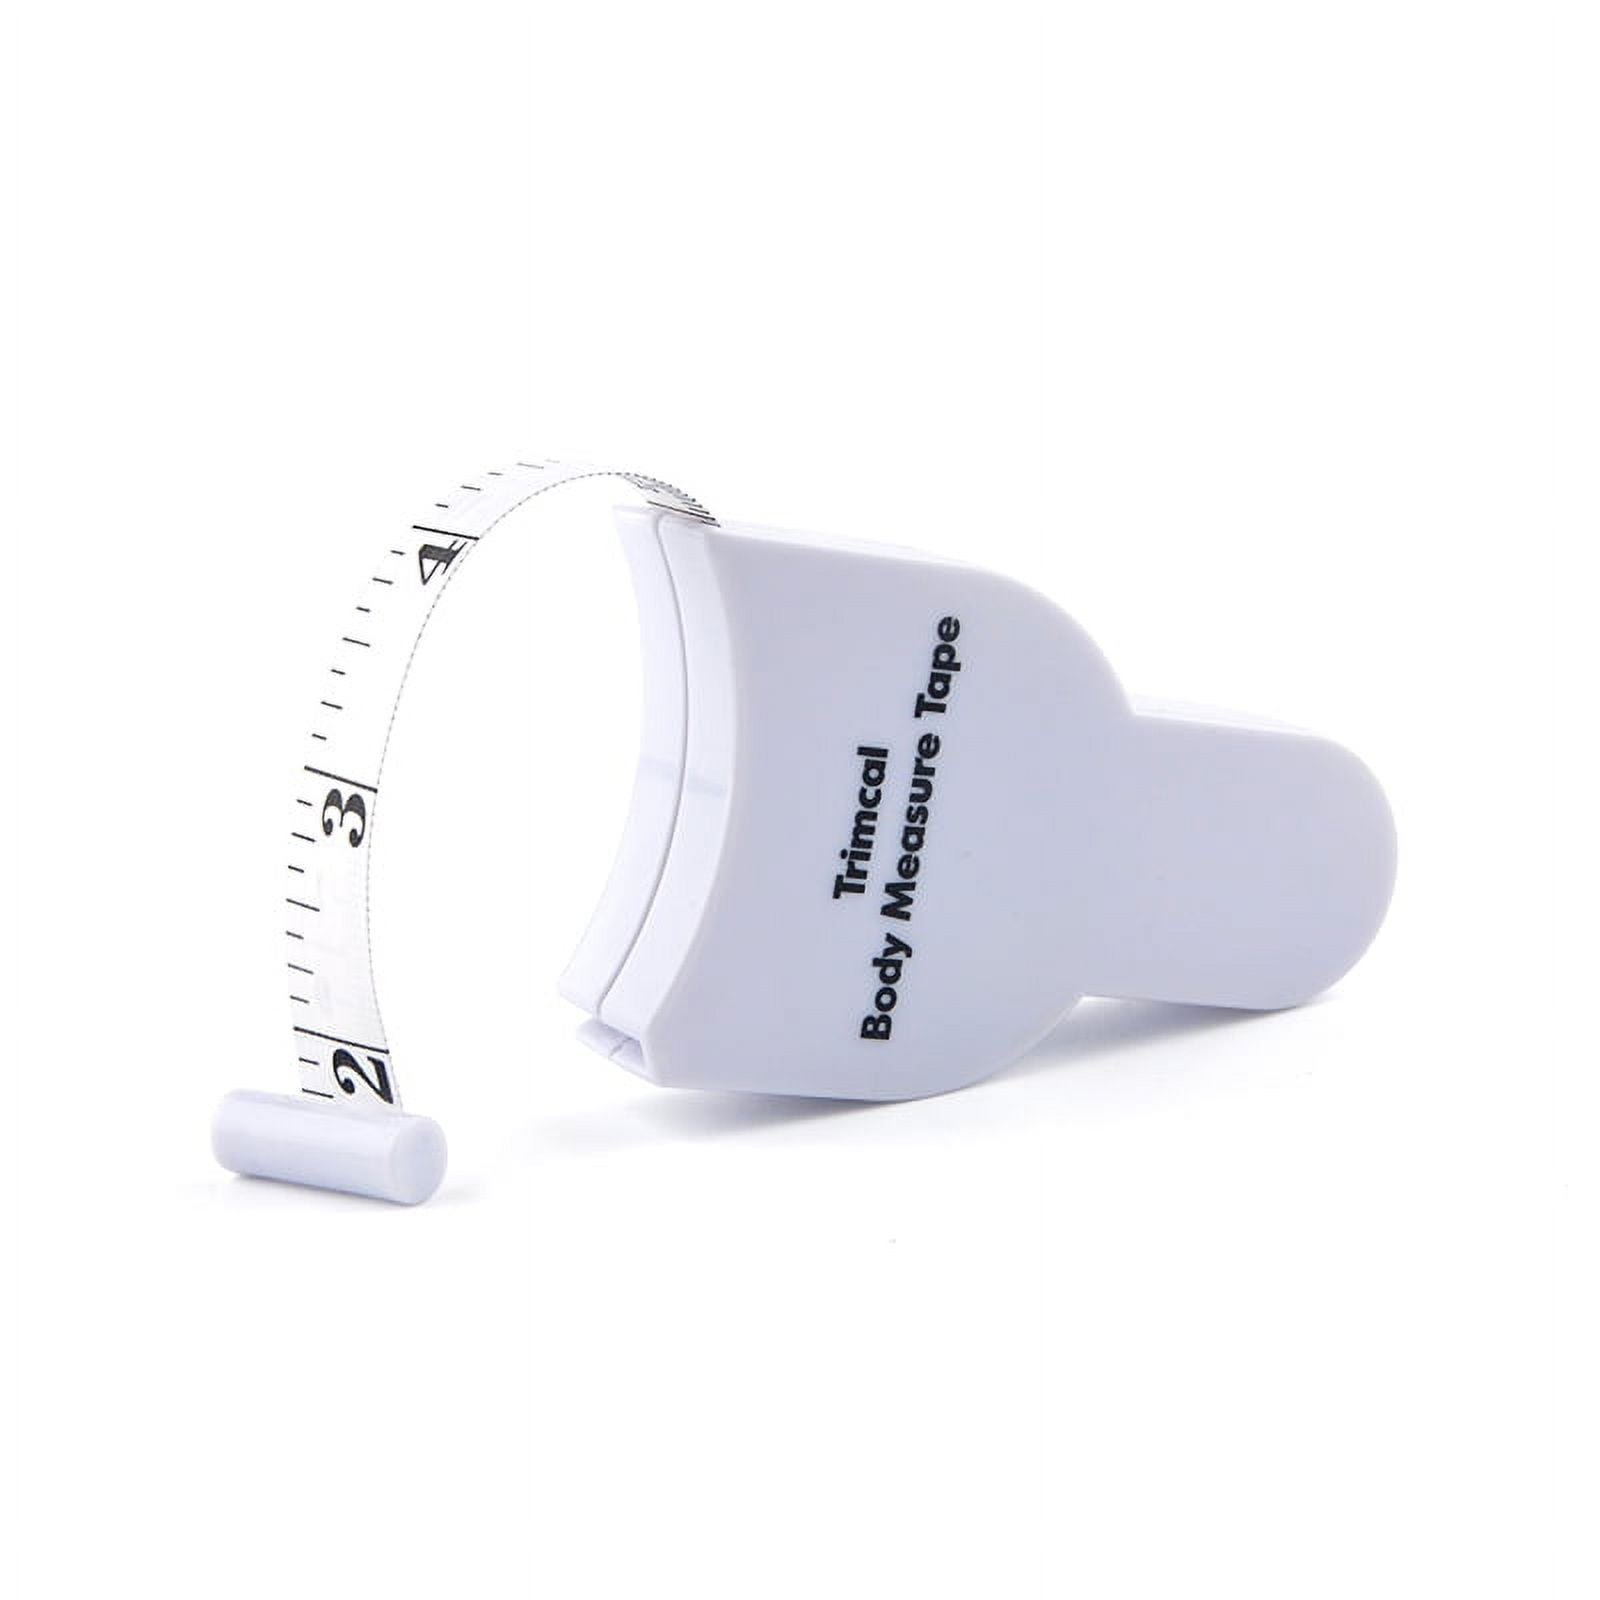 Health Care Medical Lady Body Measuring Tape Manufacturers - Customized Tape  - WINTAPE